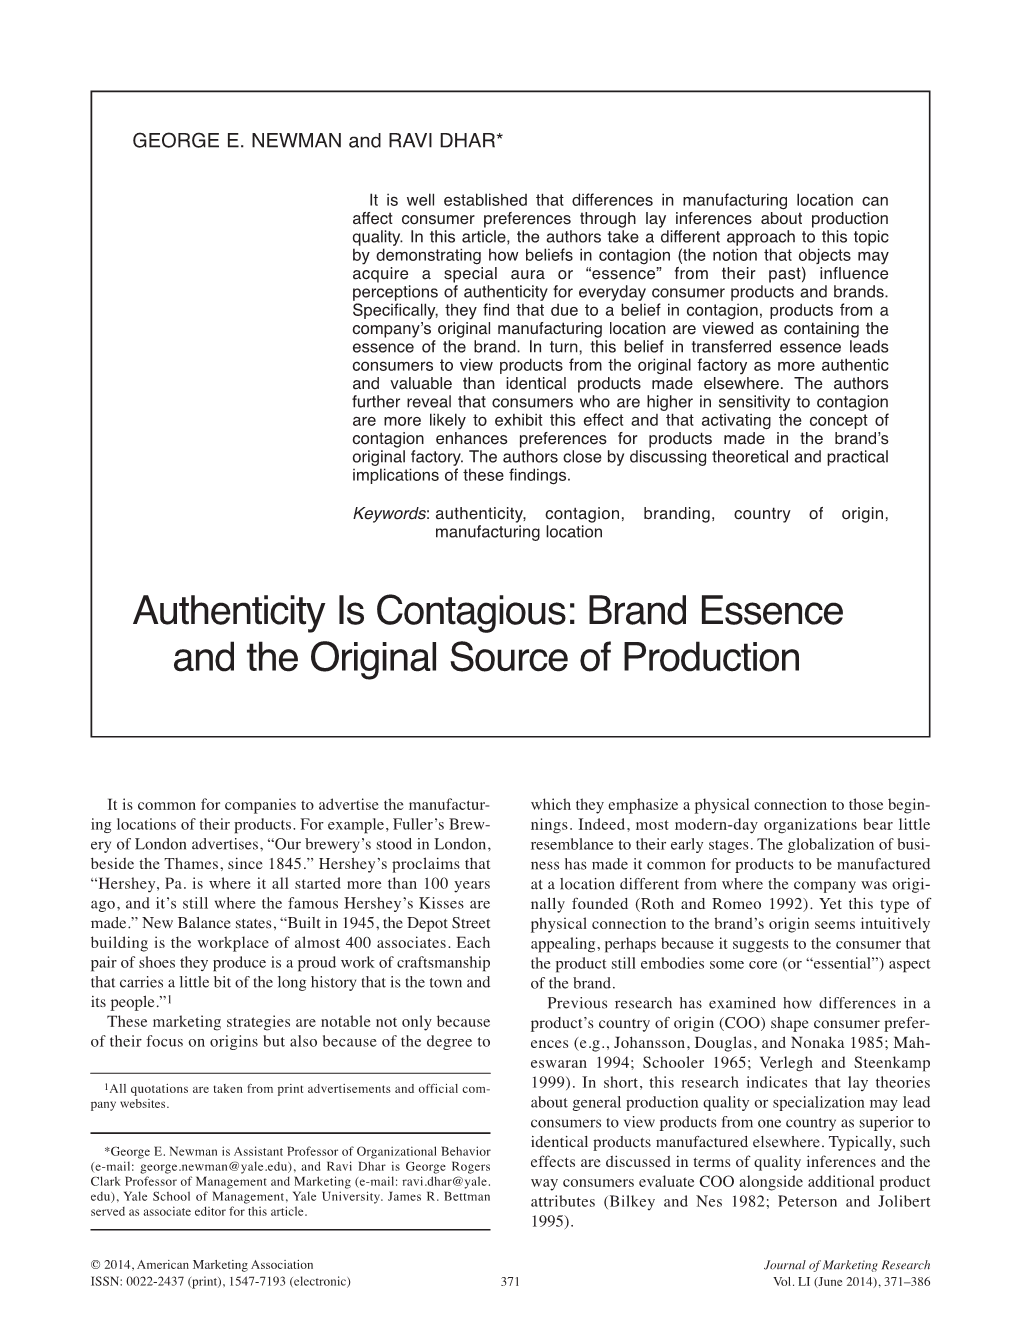 Authenticity Is Contagious: Brand Essence and the Original Source of Production